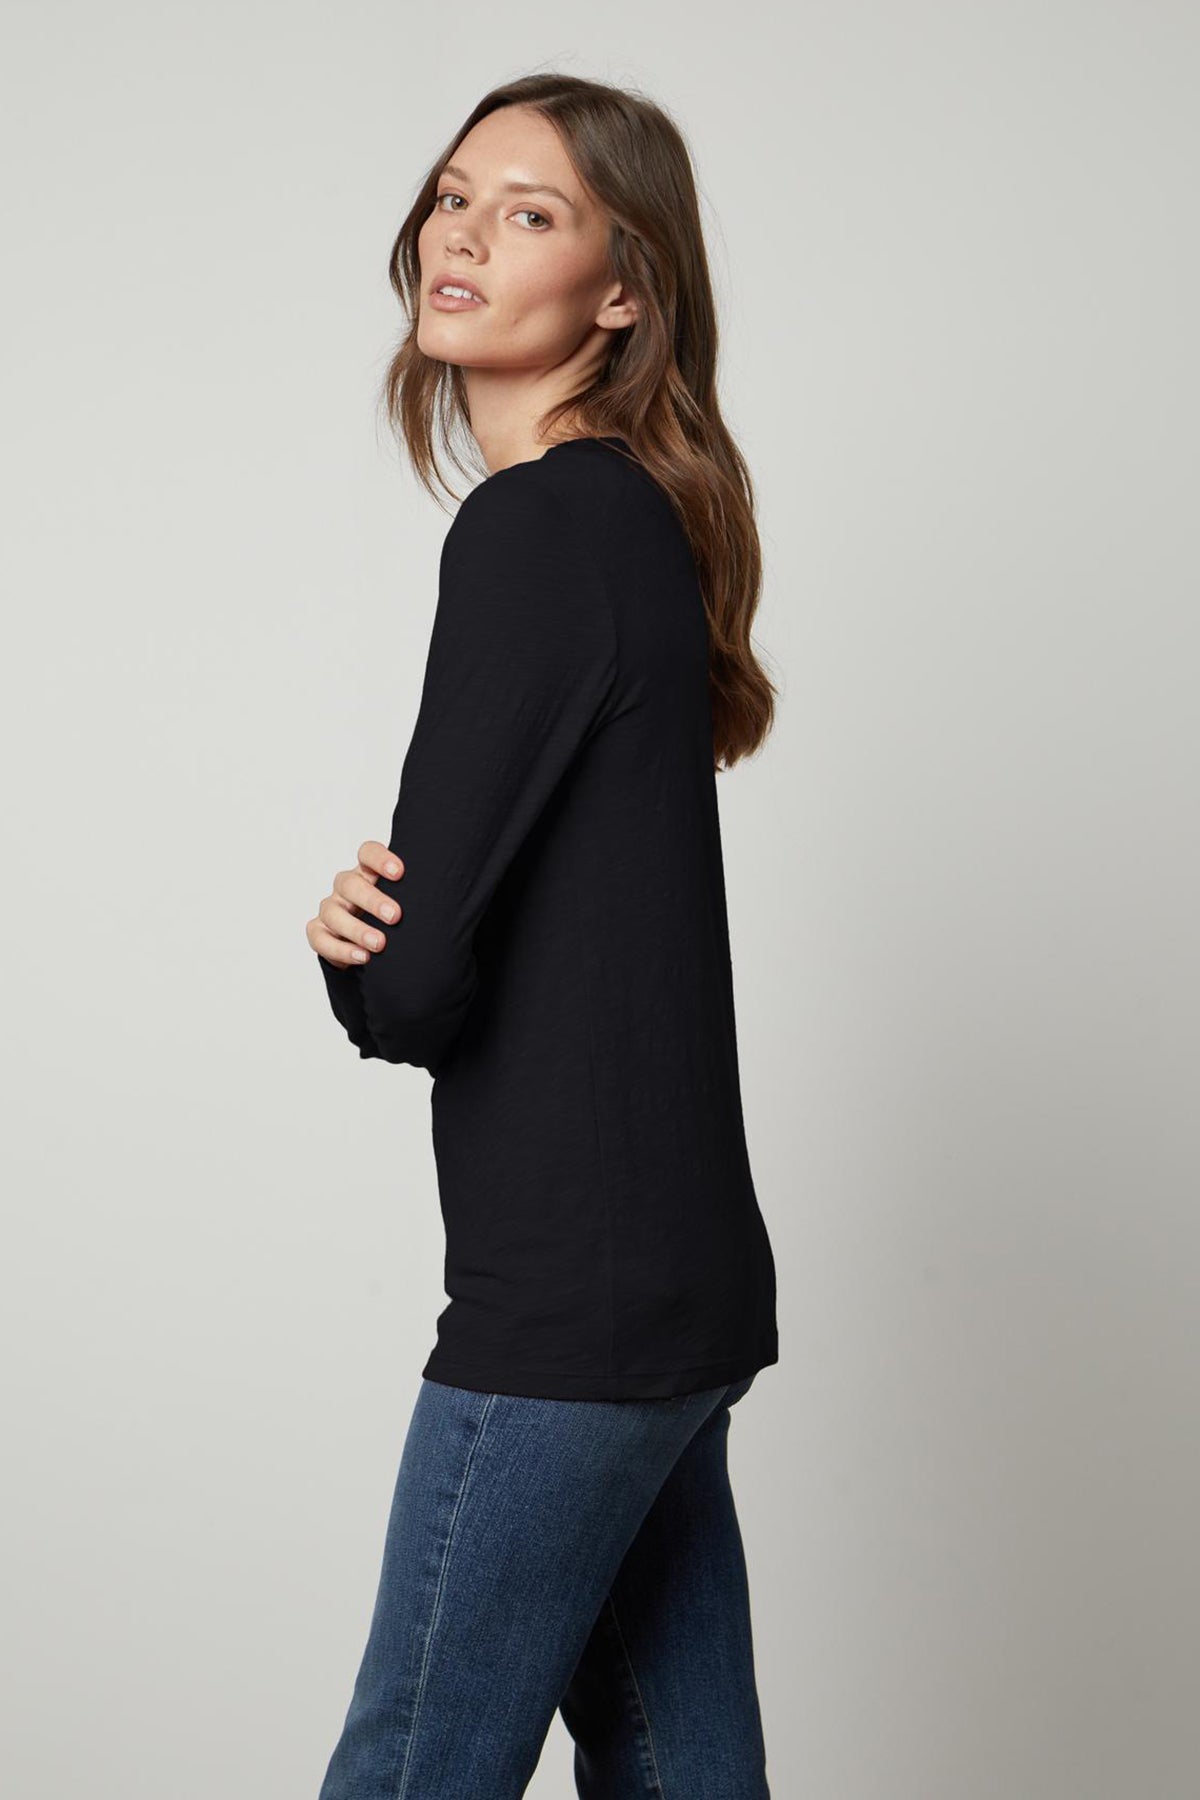 A woman wearing a black LIZZIE ORIGINAL SLUB LONG SLEEVE TEE made of cotton, paired with jeans from Velvet by Graham & Spencer.-35629837648065